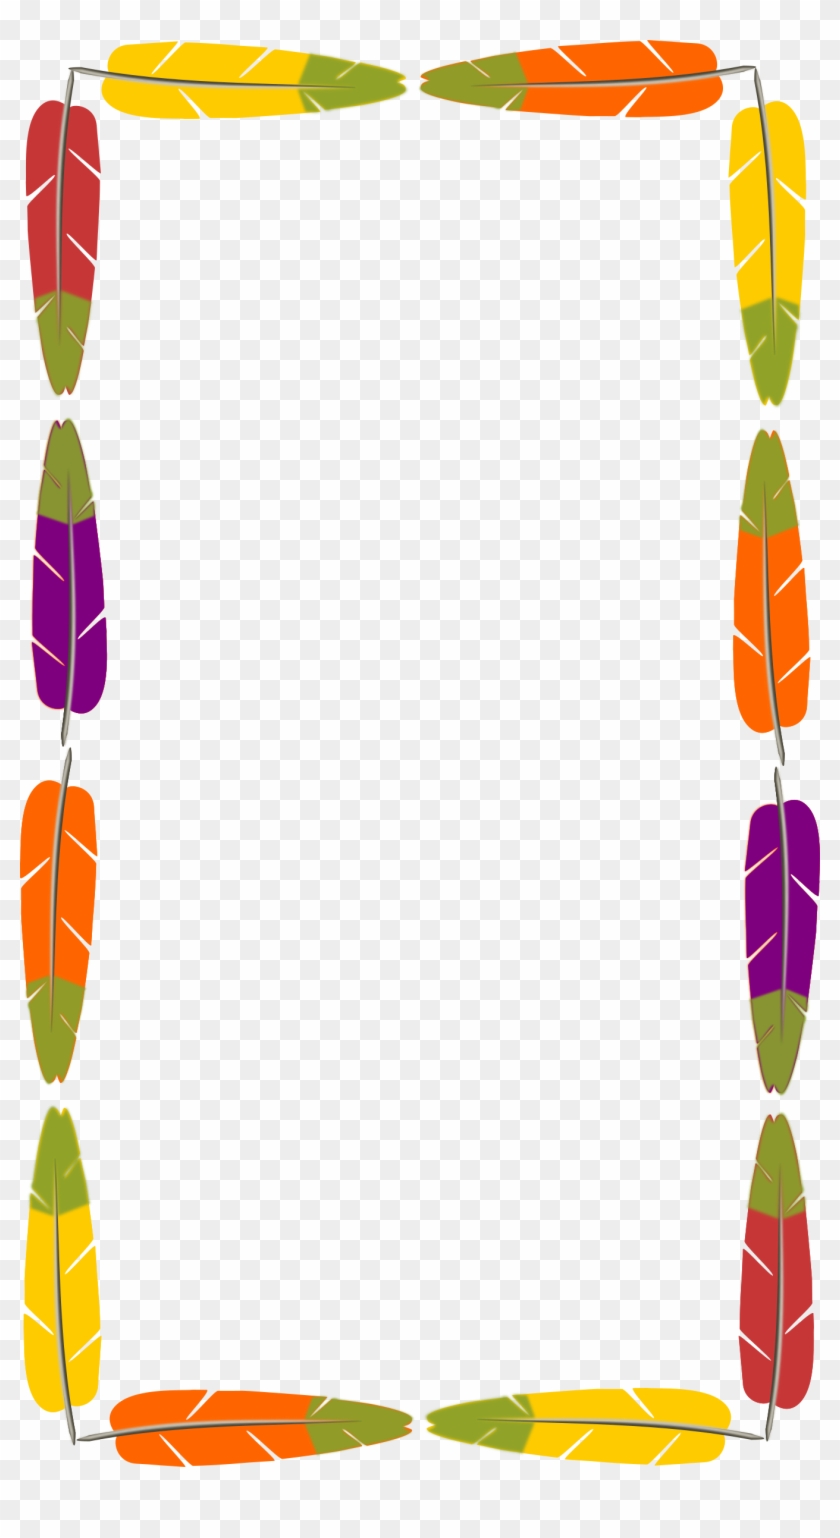 Feathers Frame - Feather Border #465289